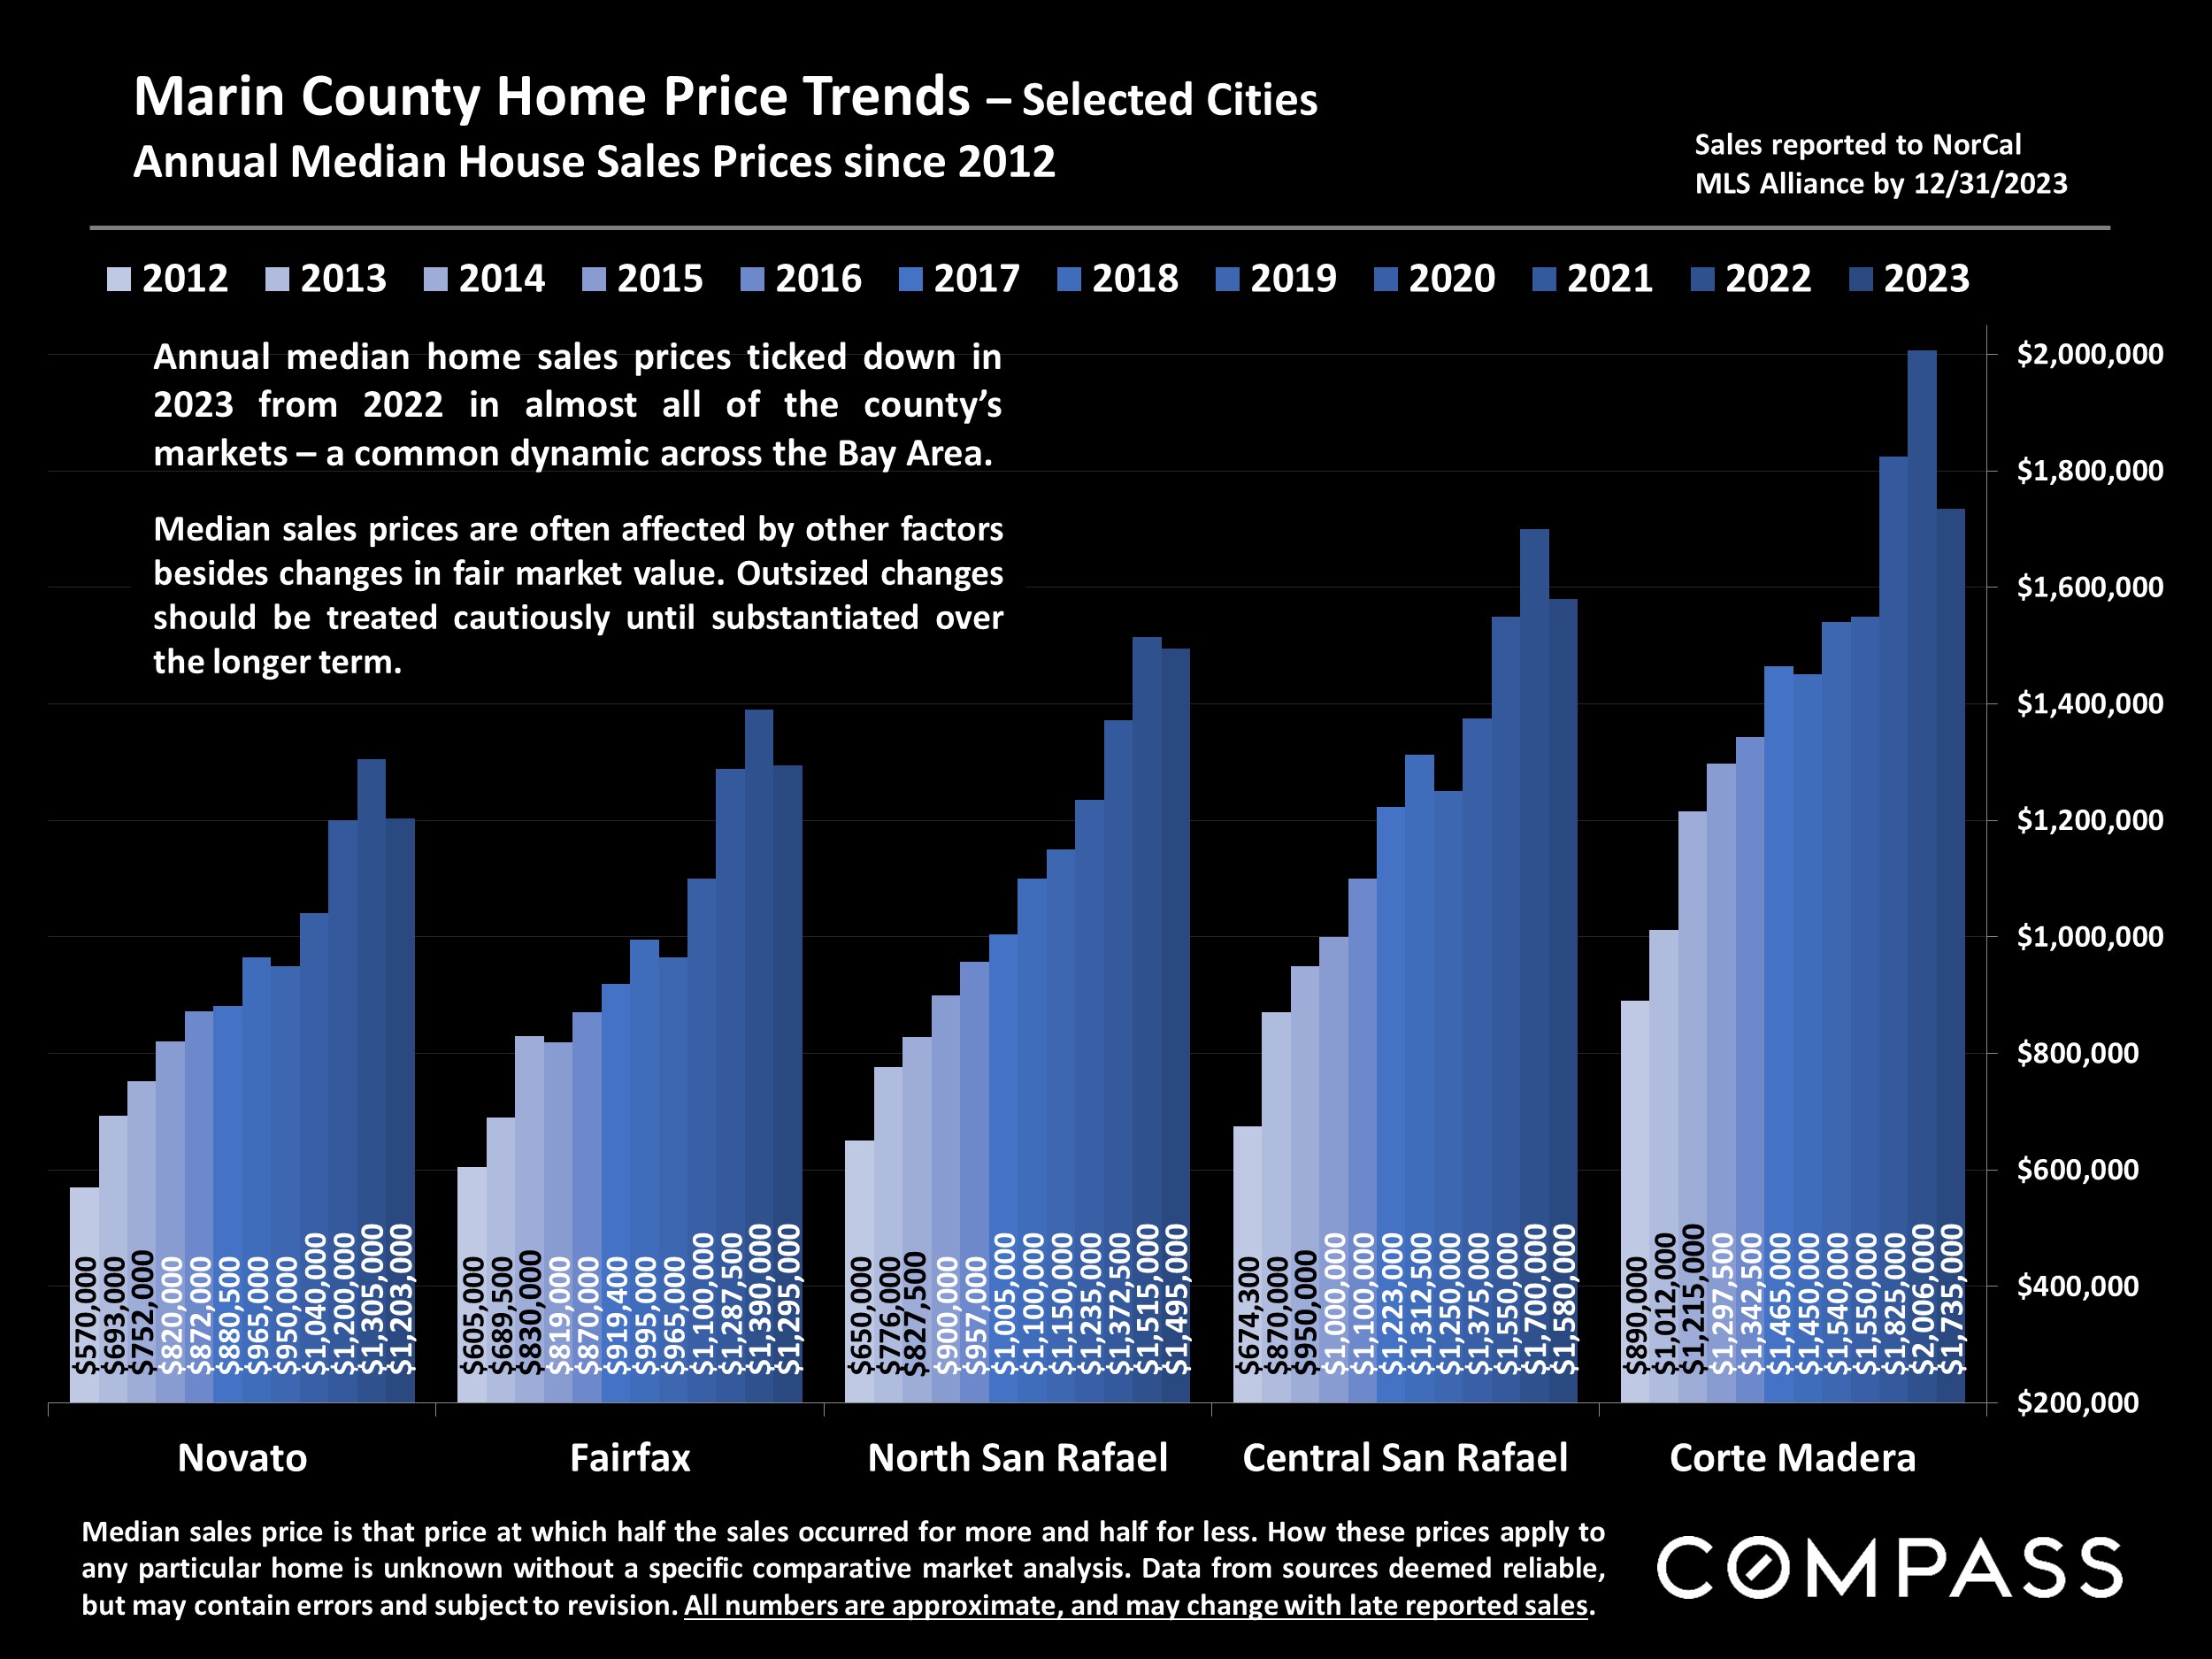 Marin County Home Price Trends - Selected Cities